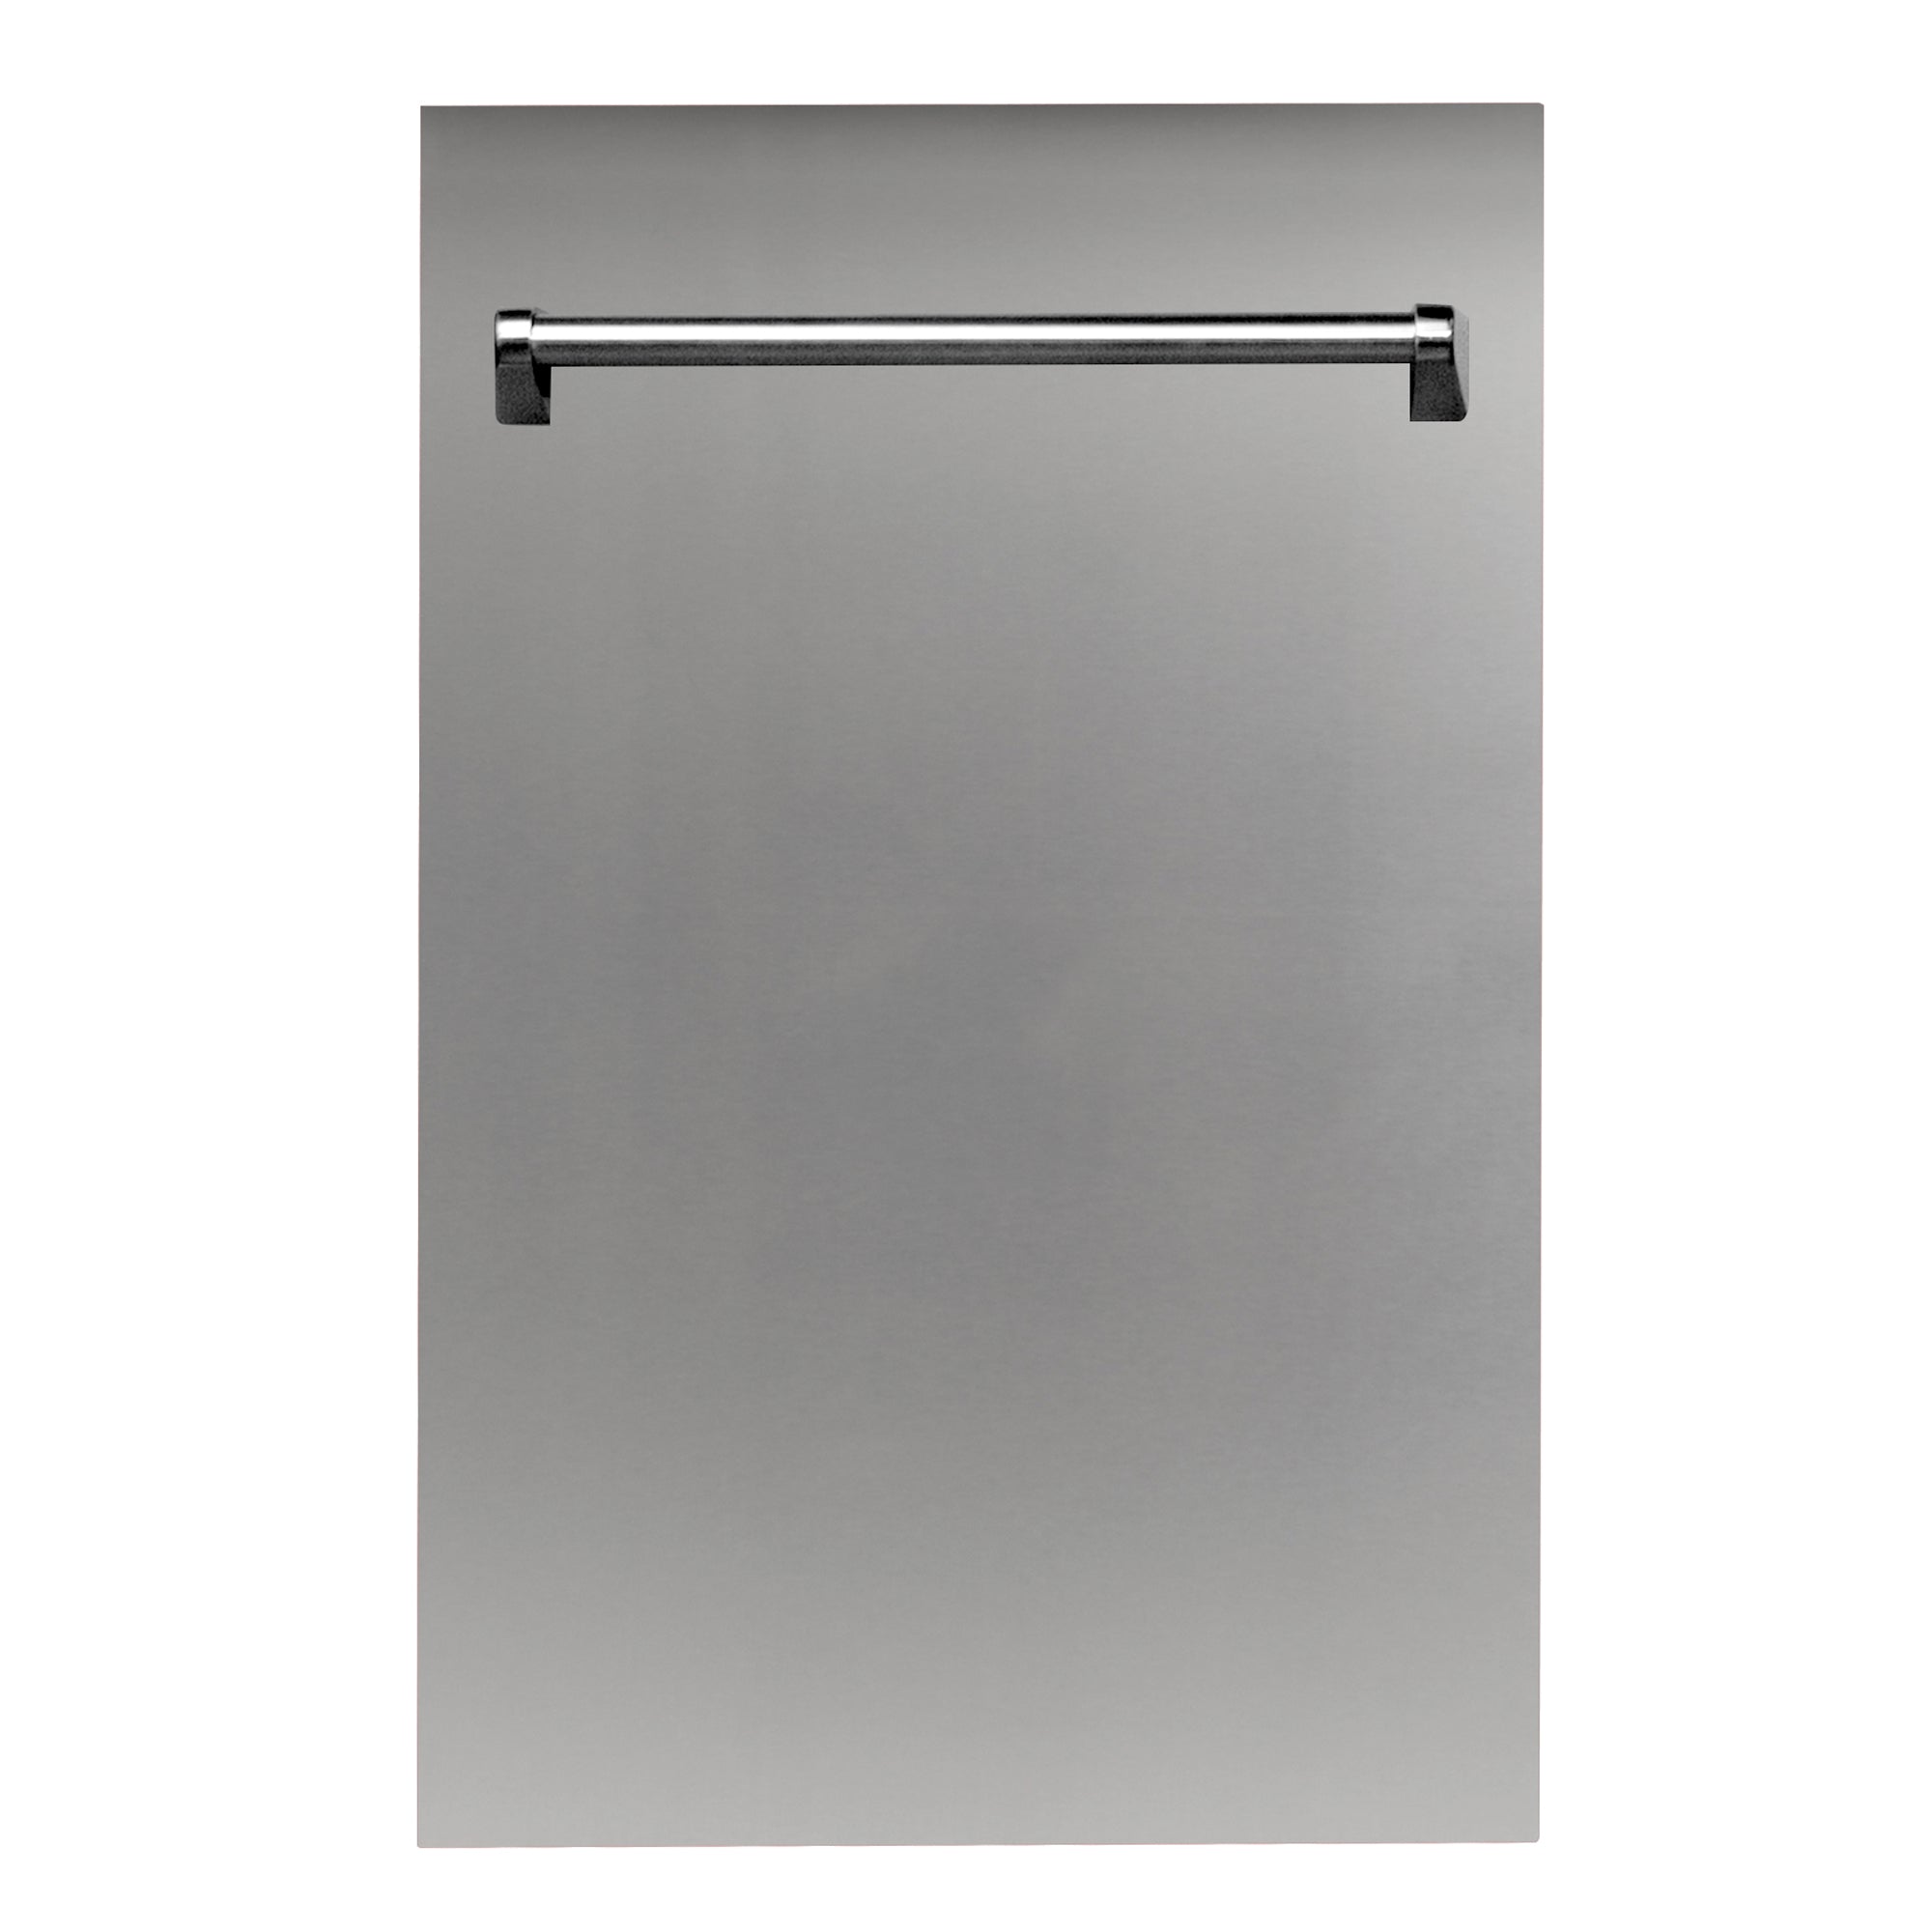 ZLINE 18" Dishwasher Panel in Stainless Steel with Traditional Handle (DP-304-H-18)